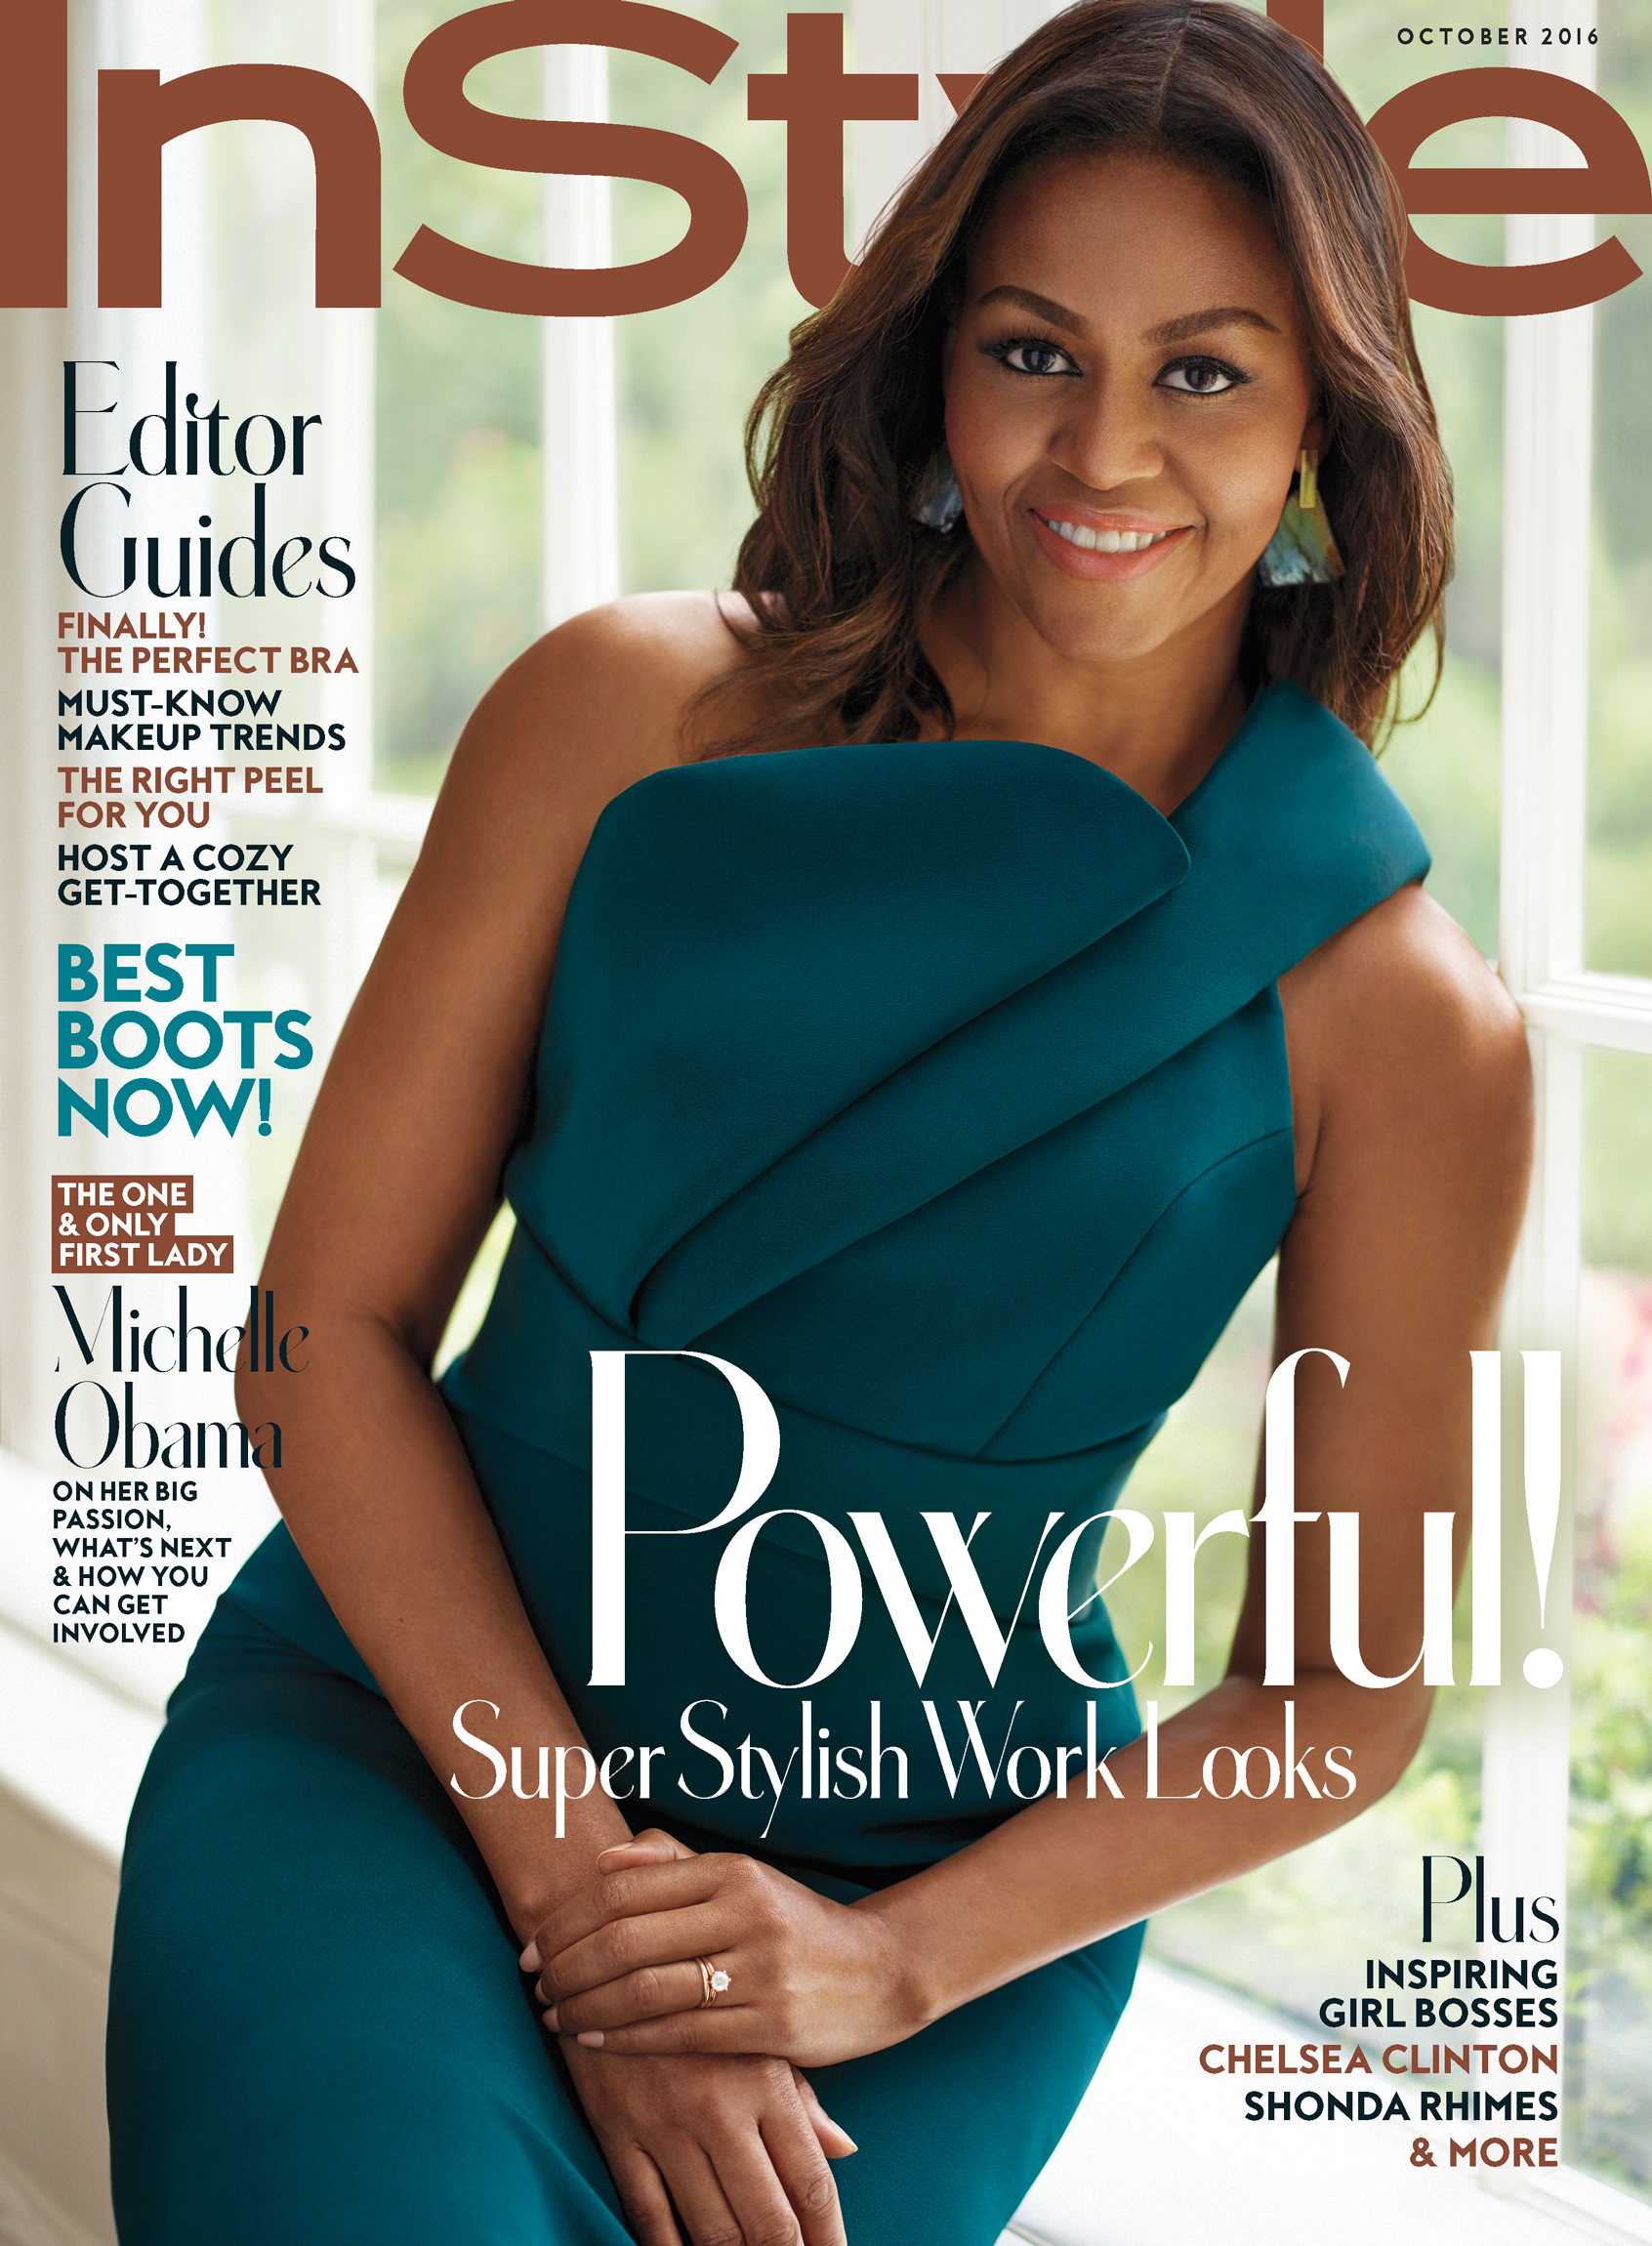 PHOTO: First Lady Michelle Obama on the October 2016 issue of InStyle magazine.